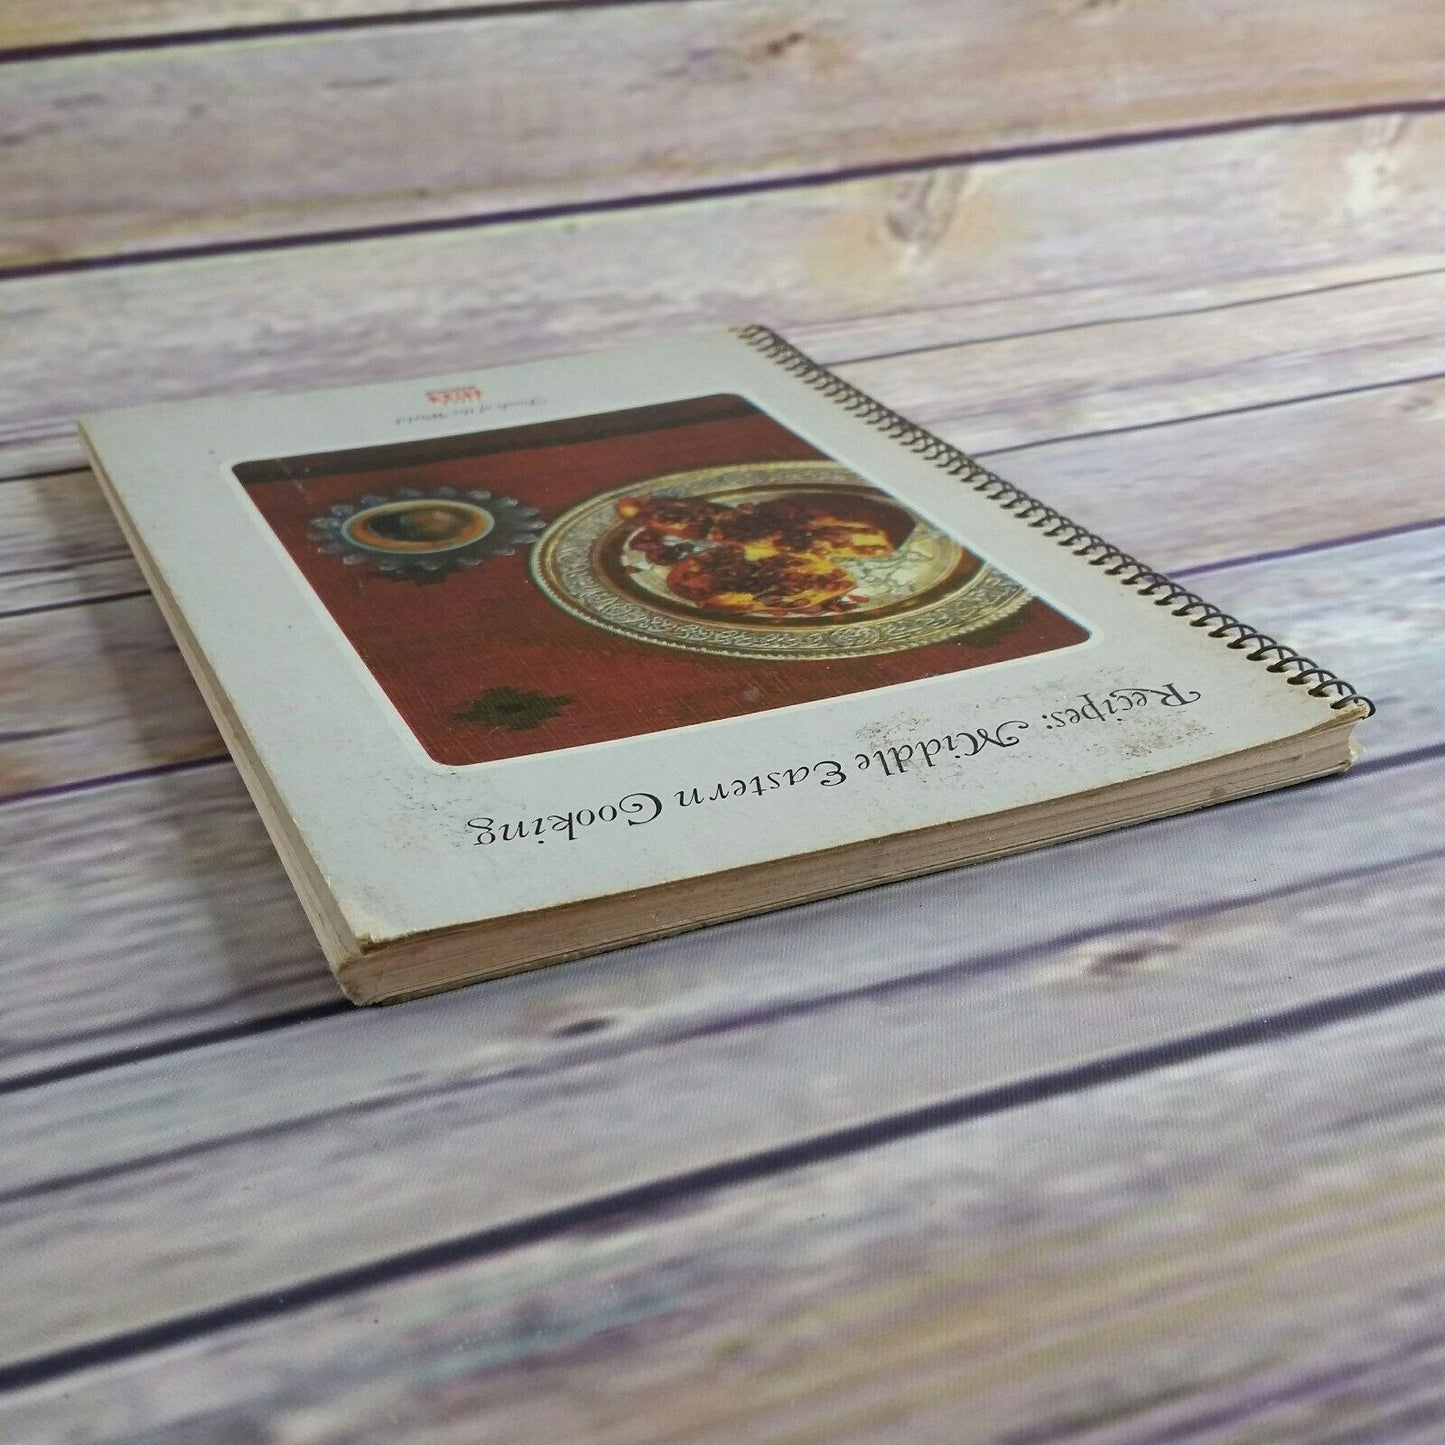 Vtg Middle Eastern Cookbook Middle Eastern Recipes Time Life Books Foods of the World 1969 Spiral Bound